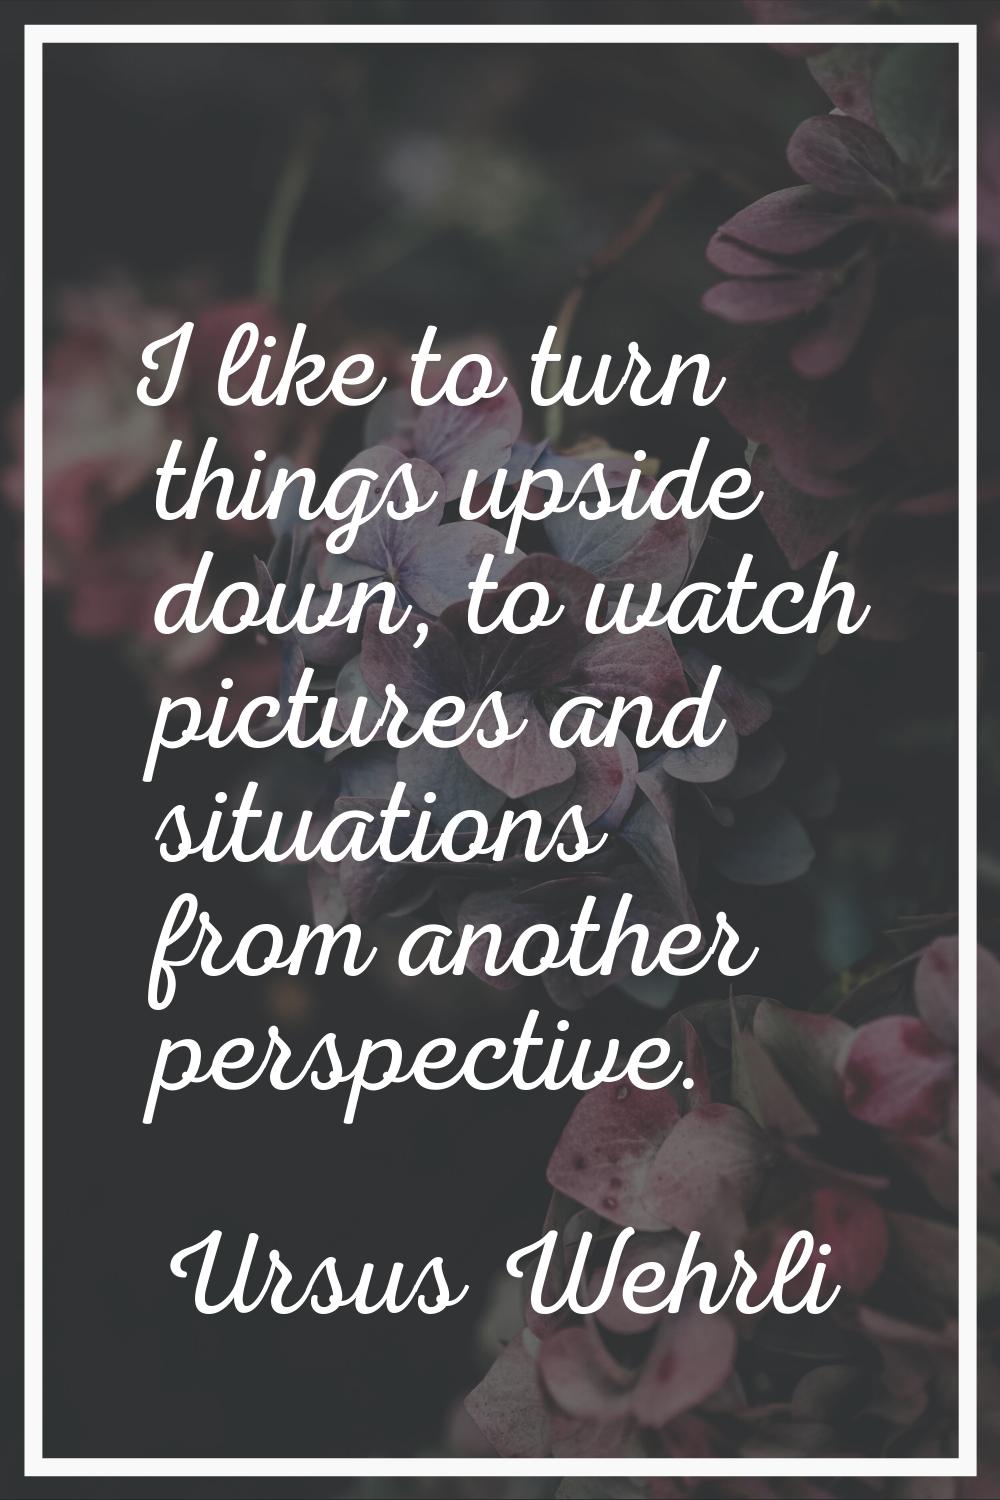 I like to turn things upside down, to watch pictures and situations from another perspective.